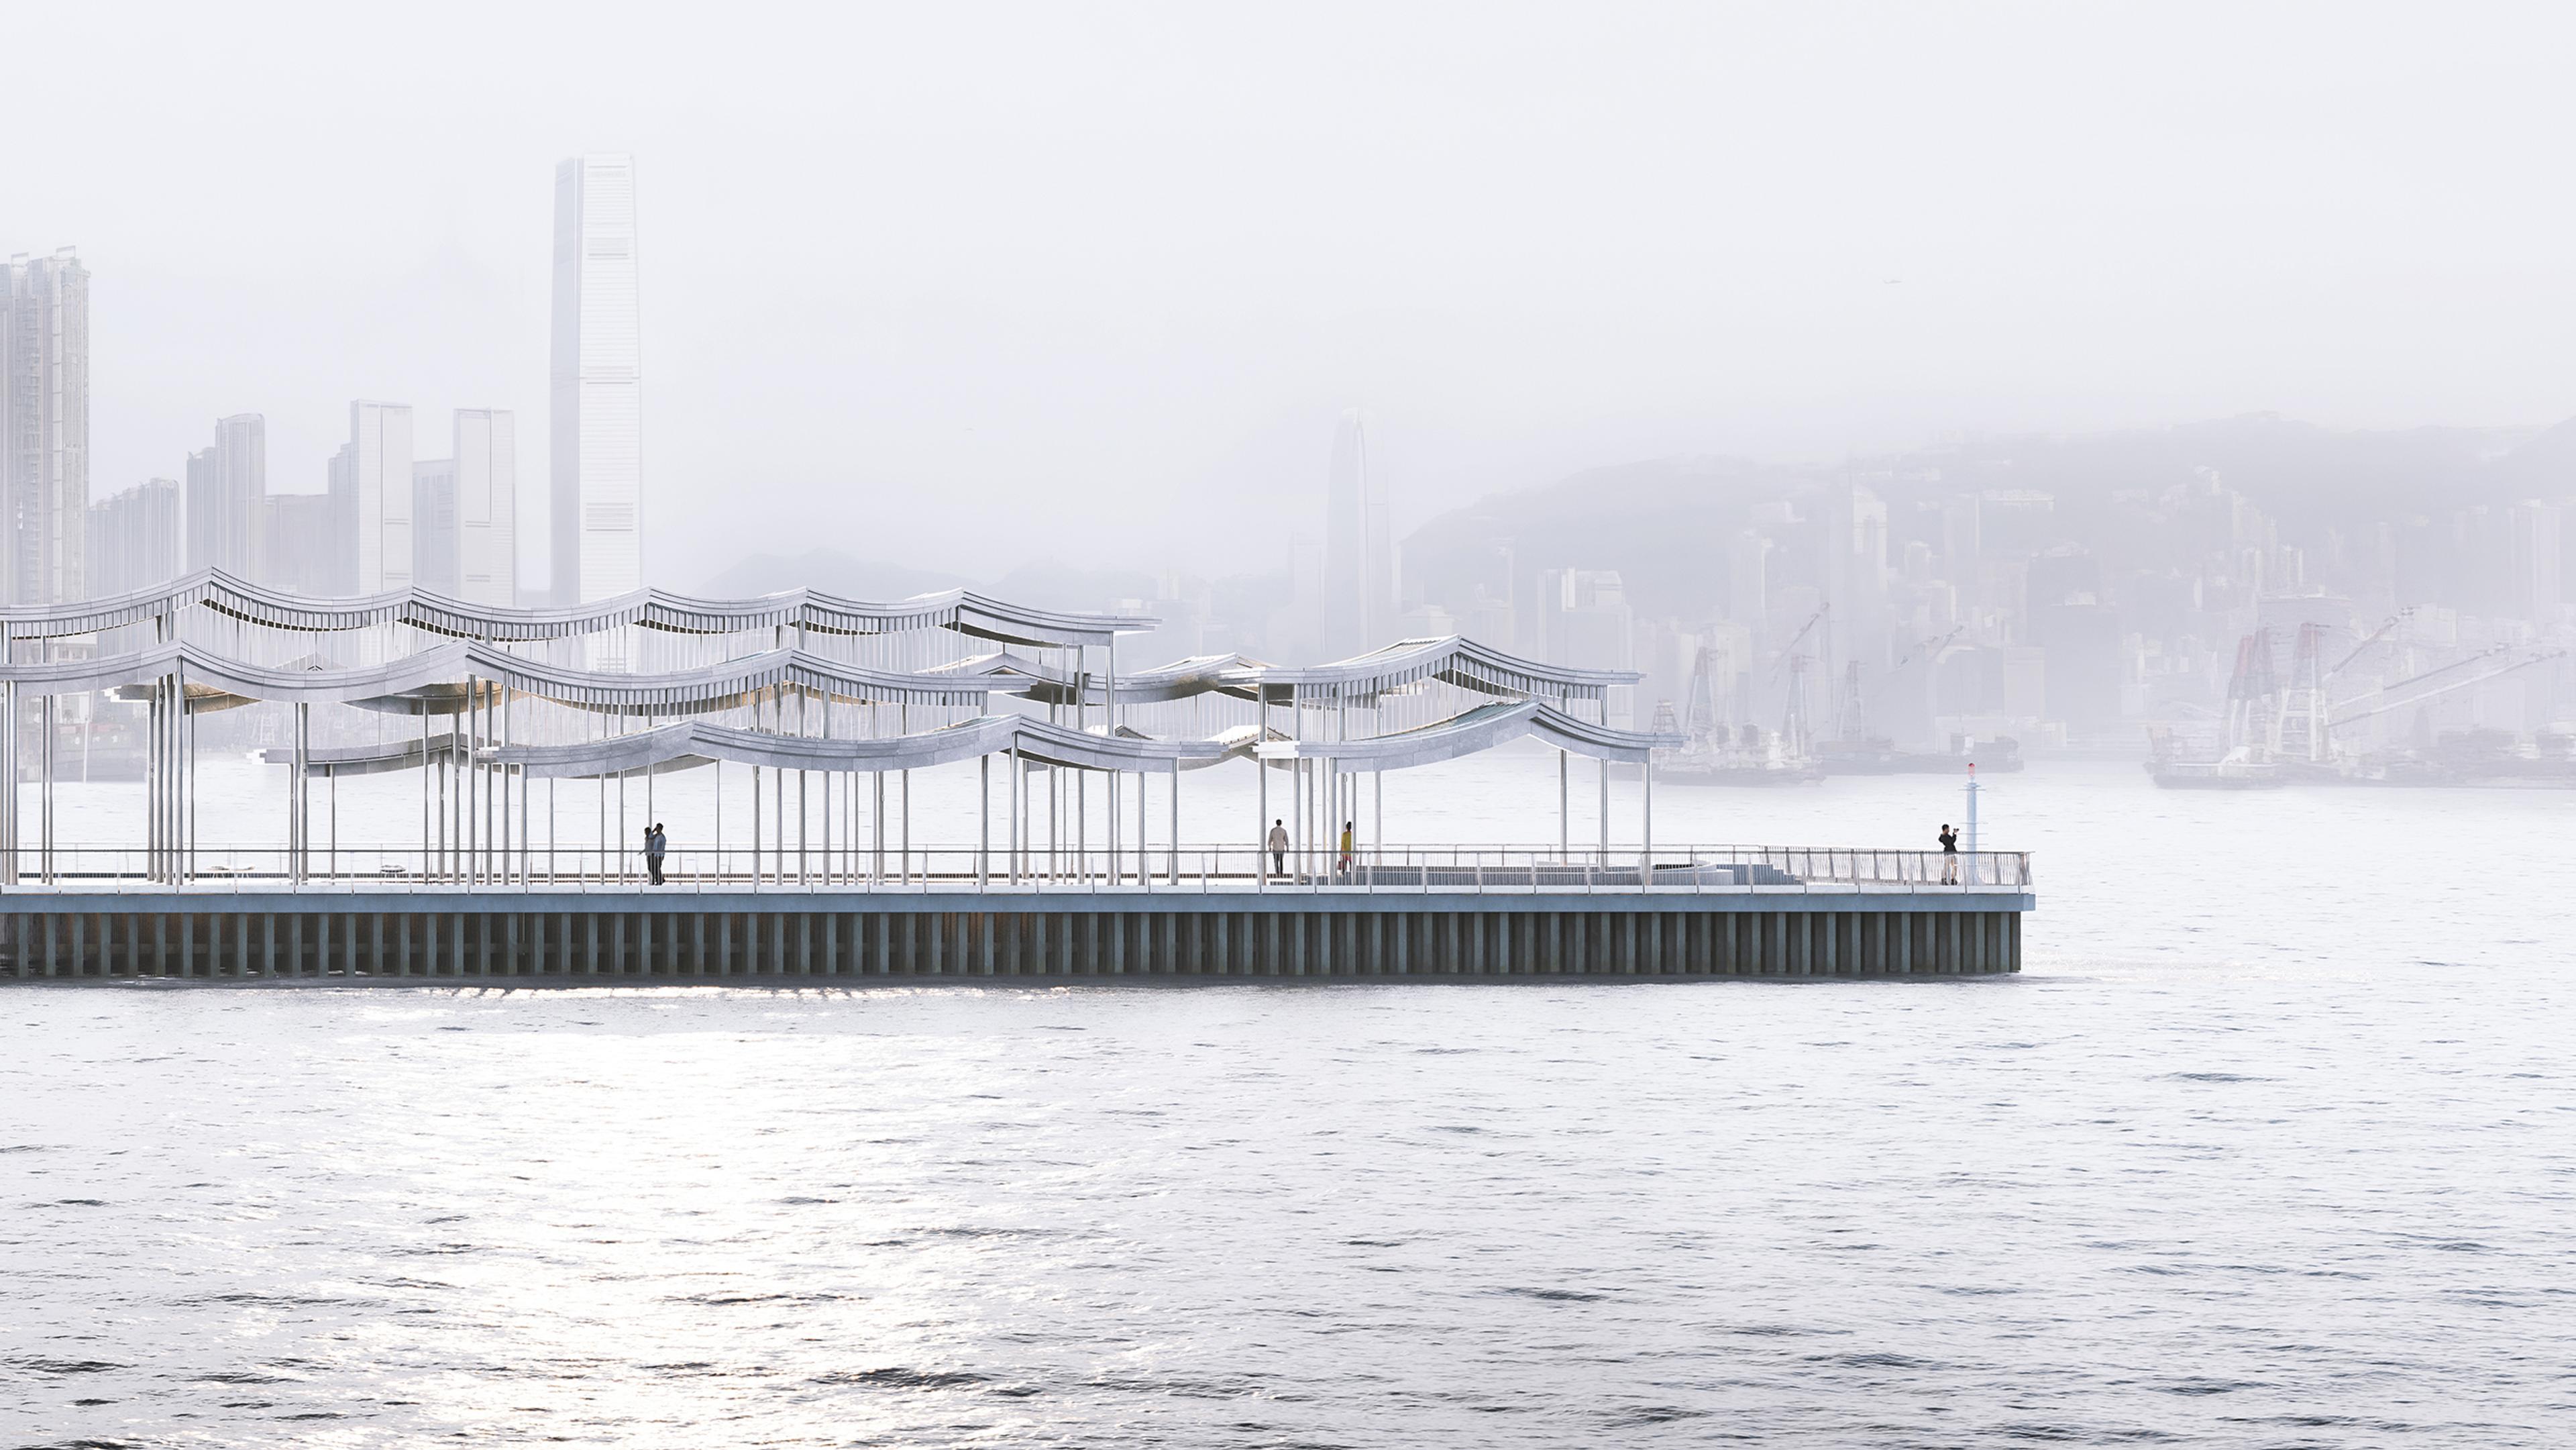 harbourfront with pier with undulating canopy overlooking waterfront